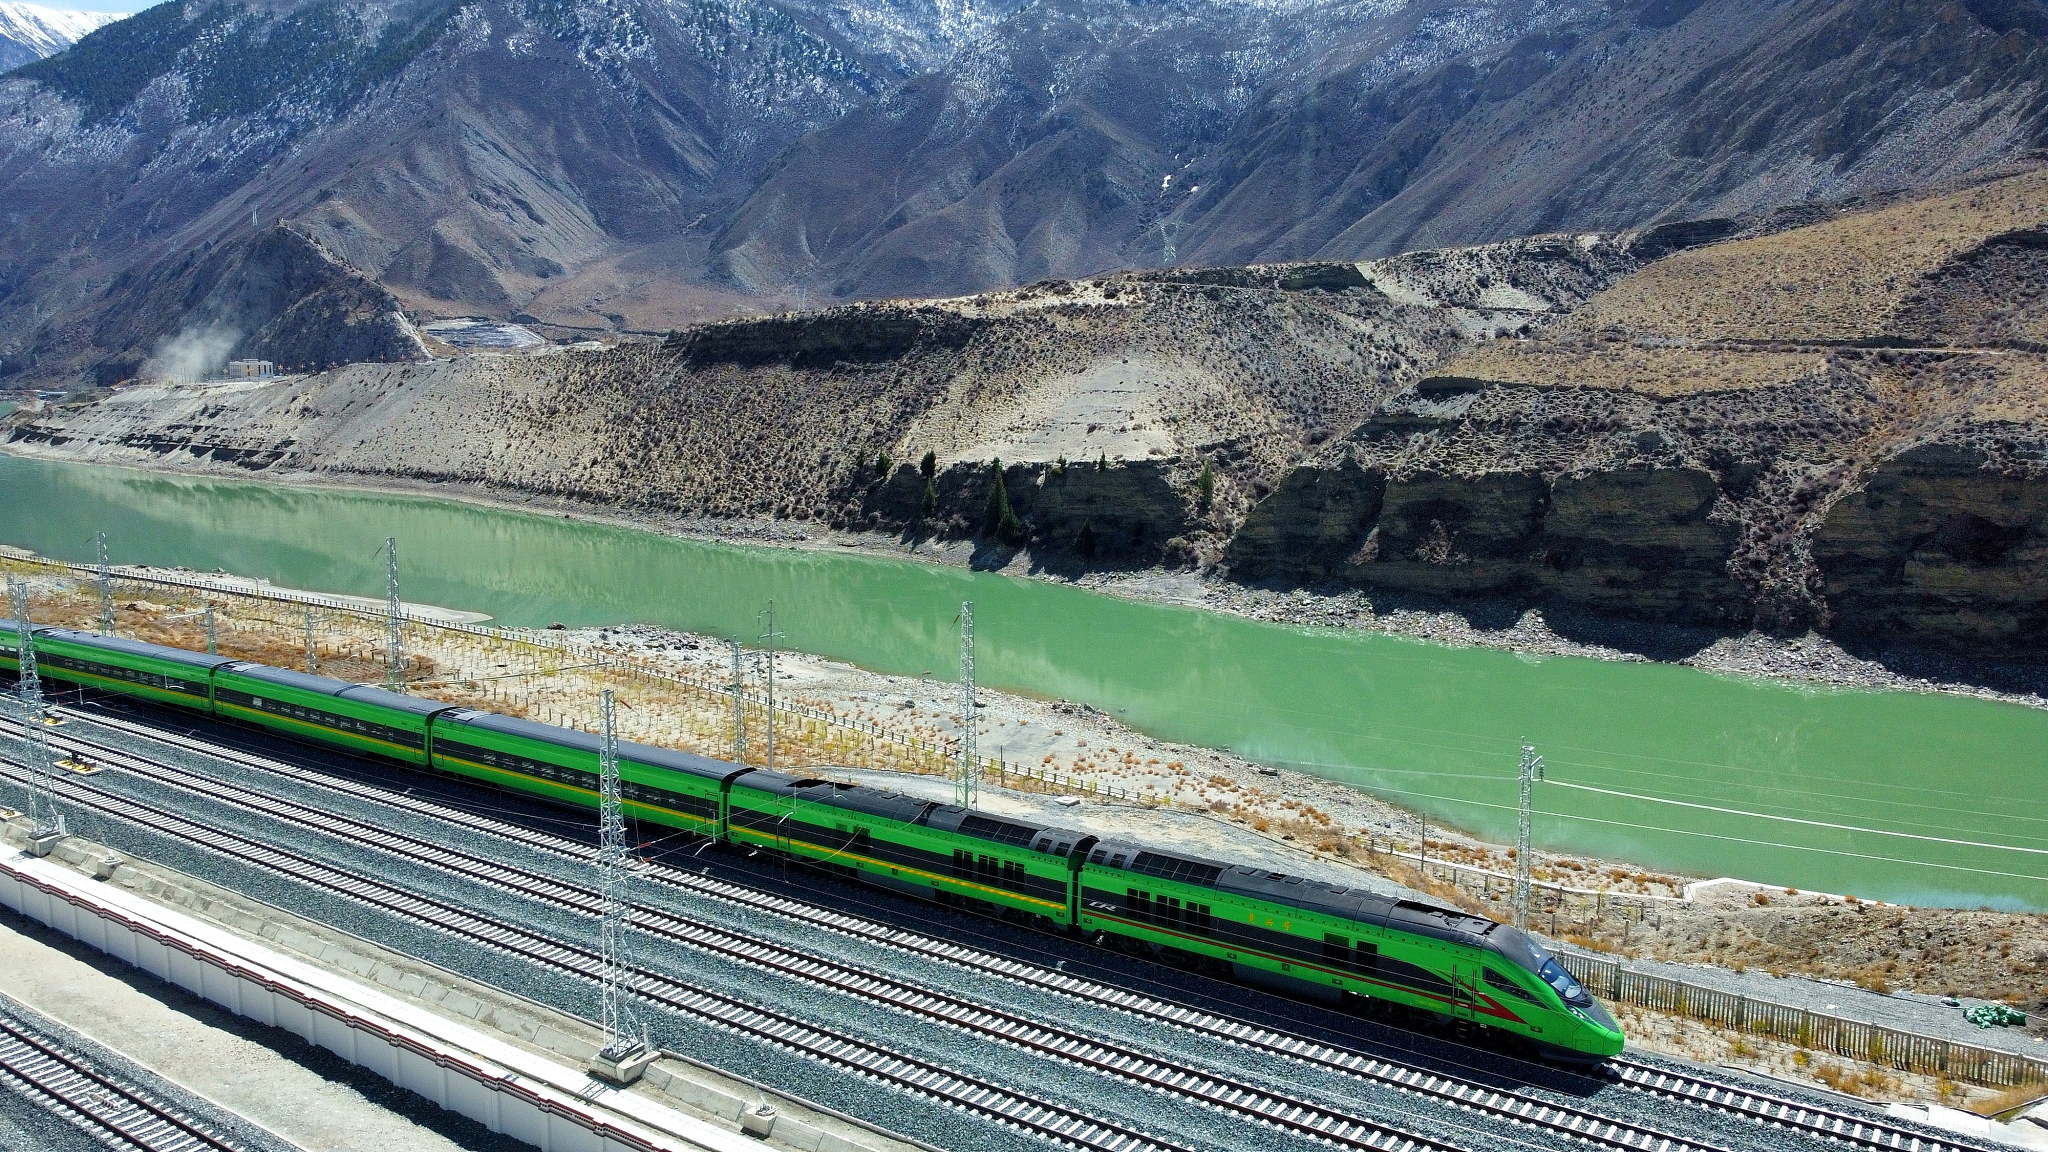 The Fuxing high-speed train is seen in Shannan City, southwest China's Xizang Autonomous Region, March 13, 2023. /CFP